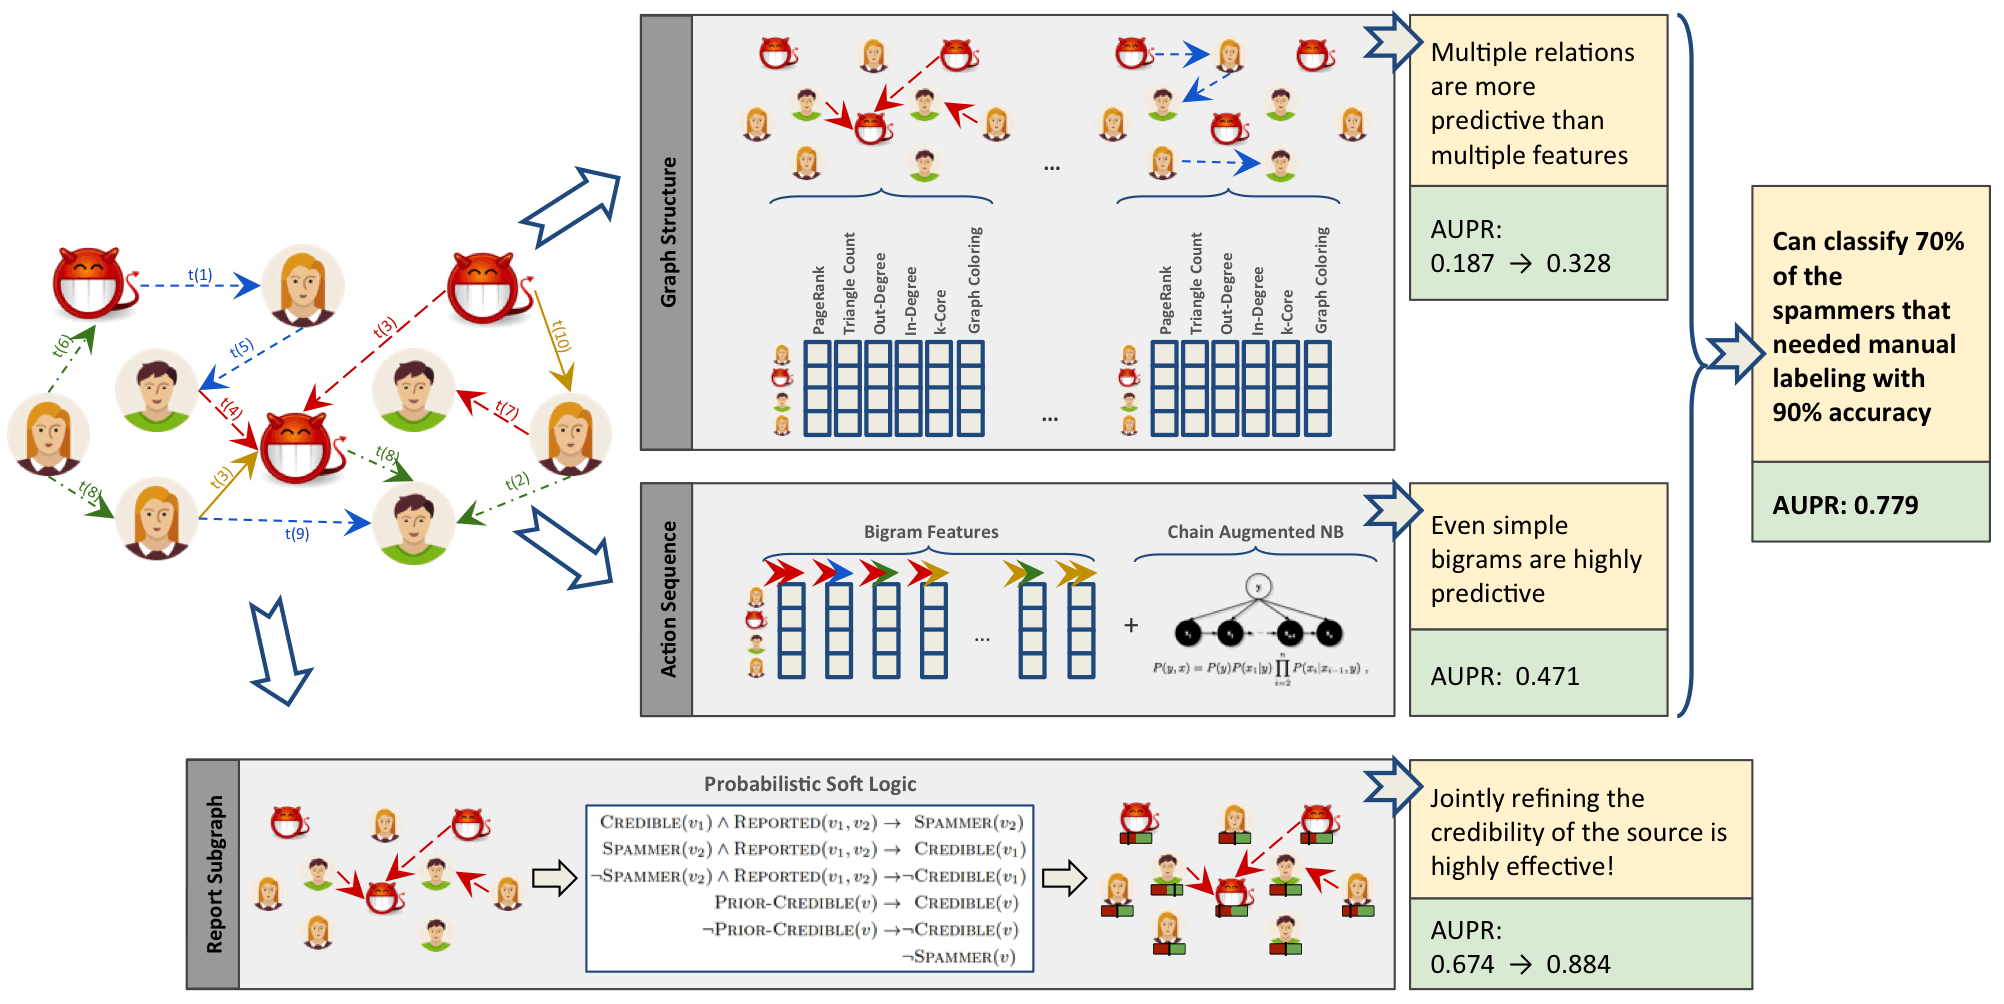 Collective Spammer Detection in Evolving Multi-Relational Social Networks